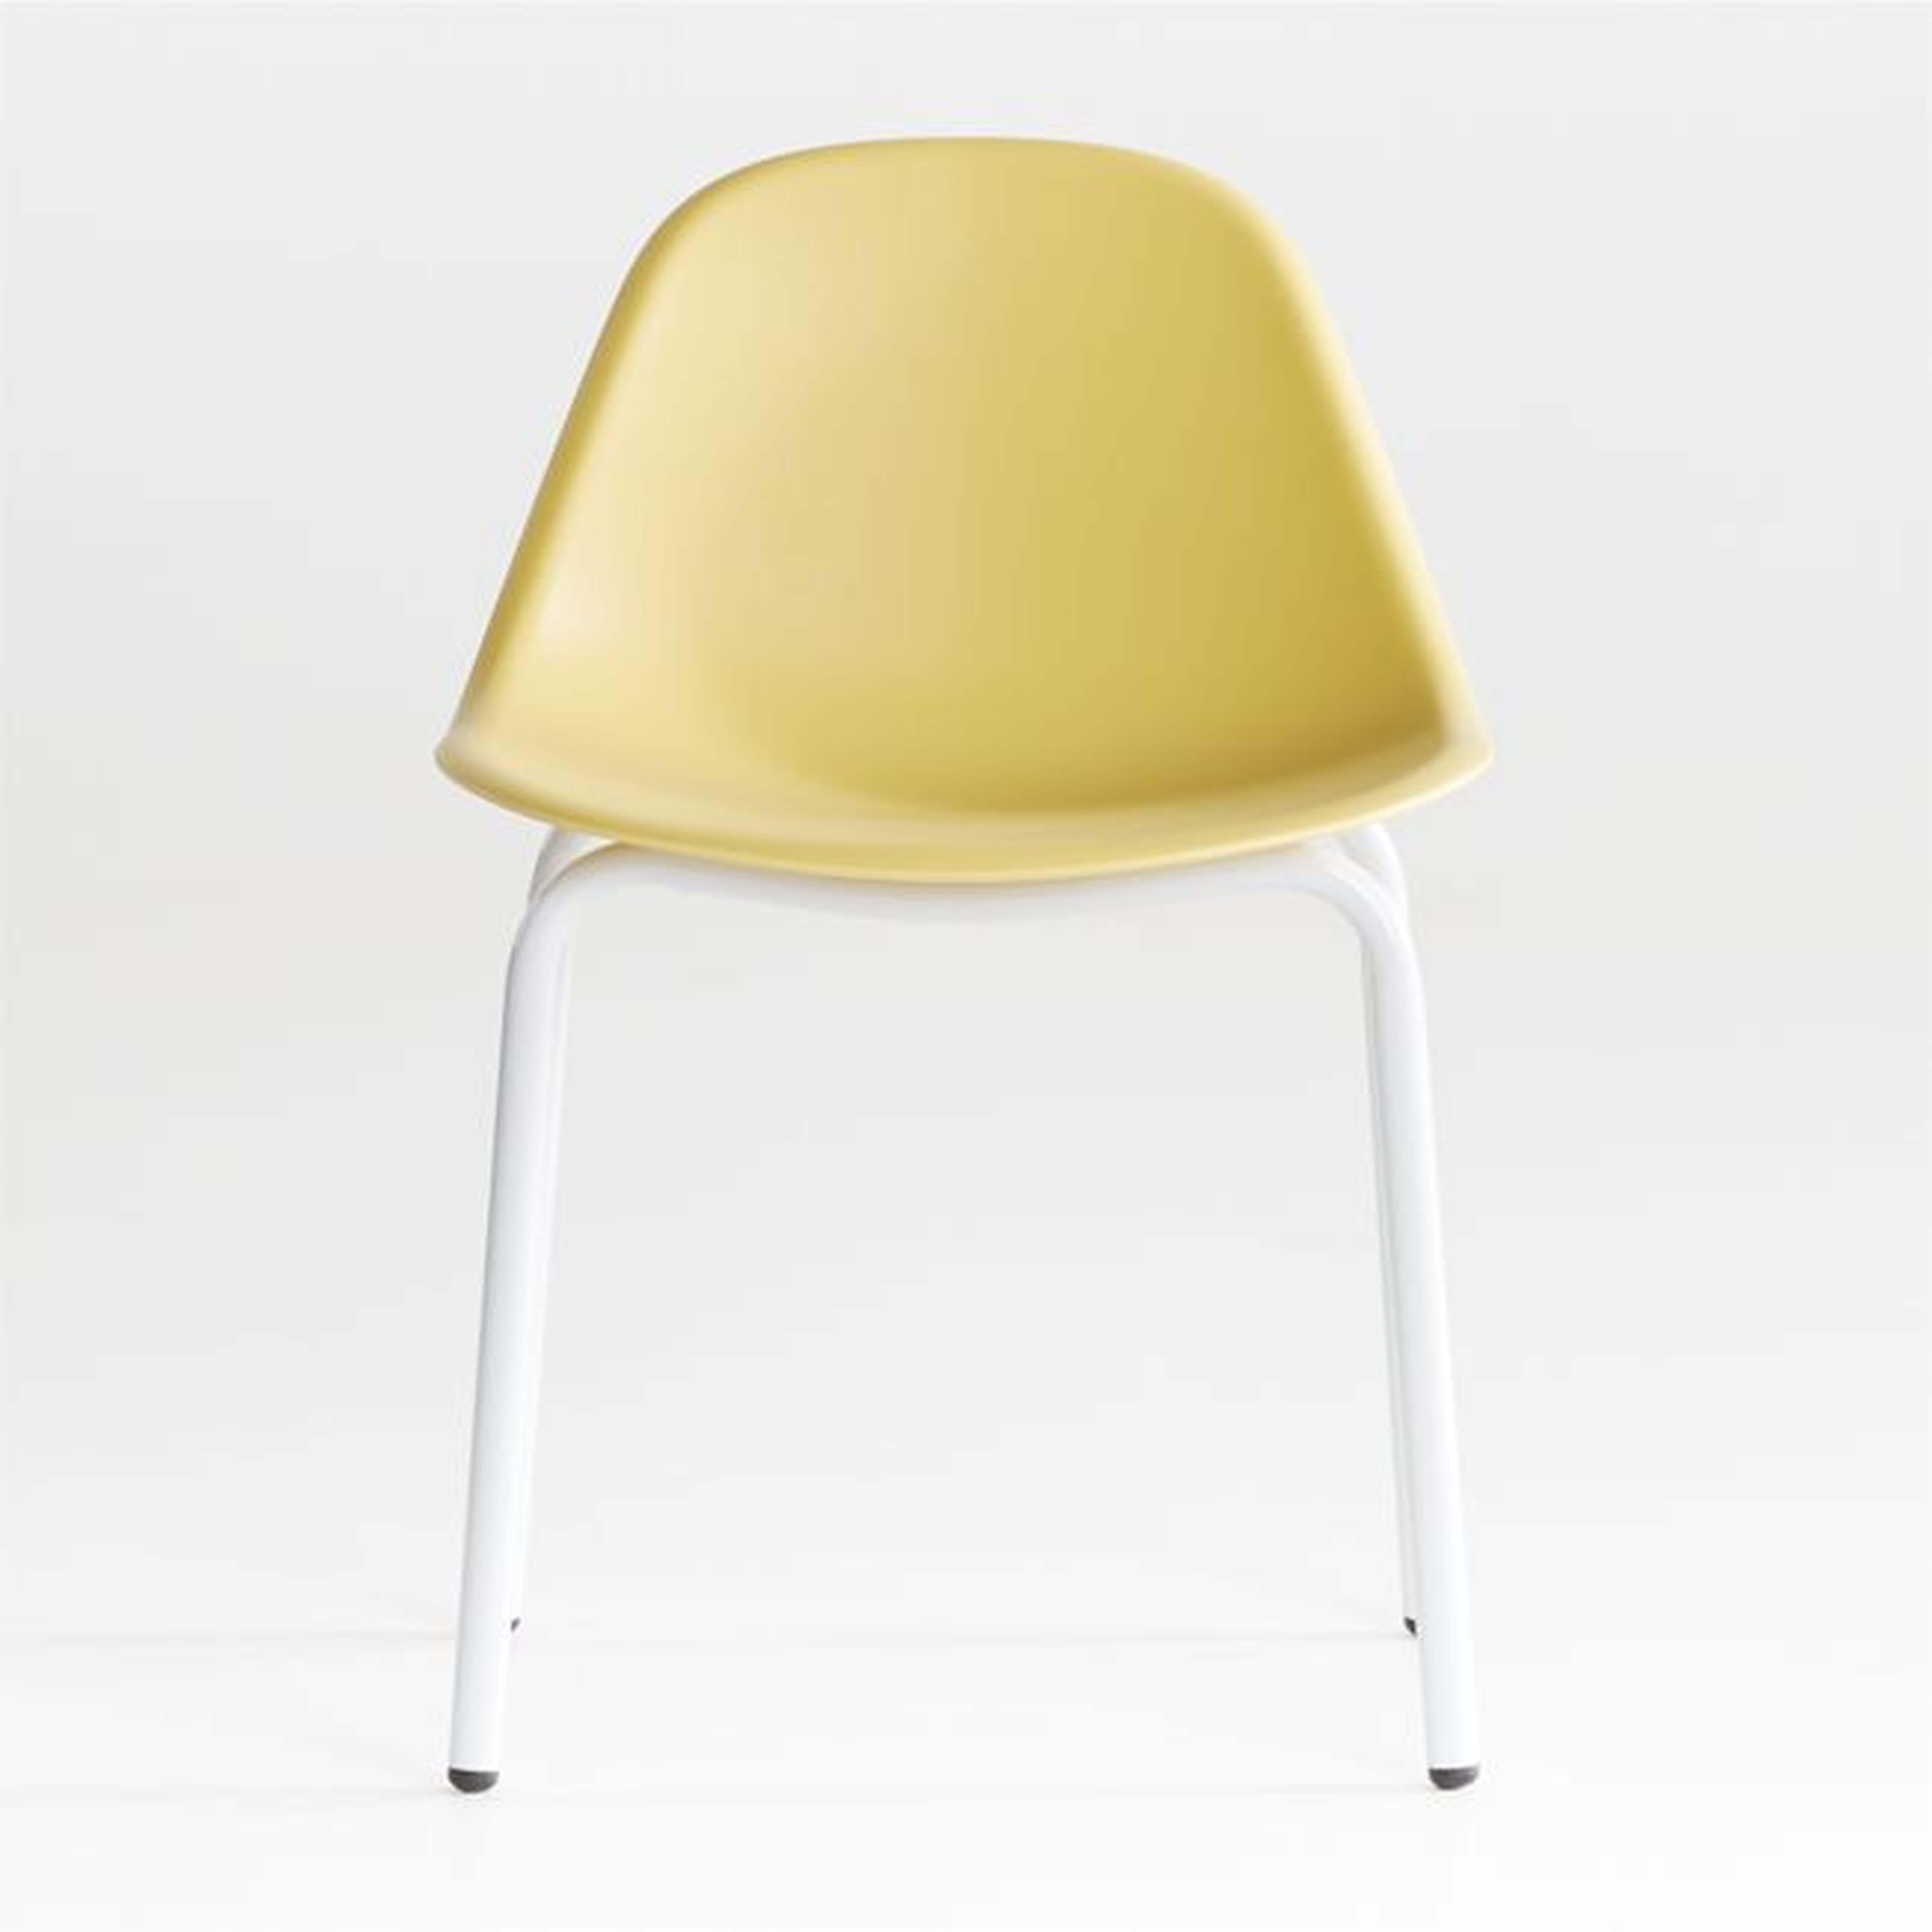 Lennon Yellow Molded Play Chair - Crate and Barrel